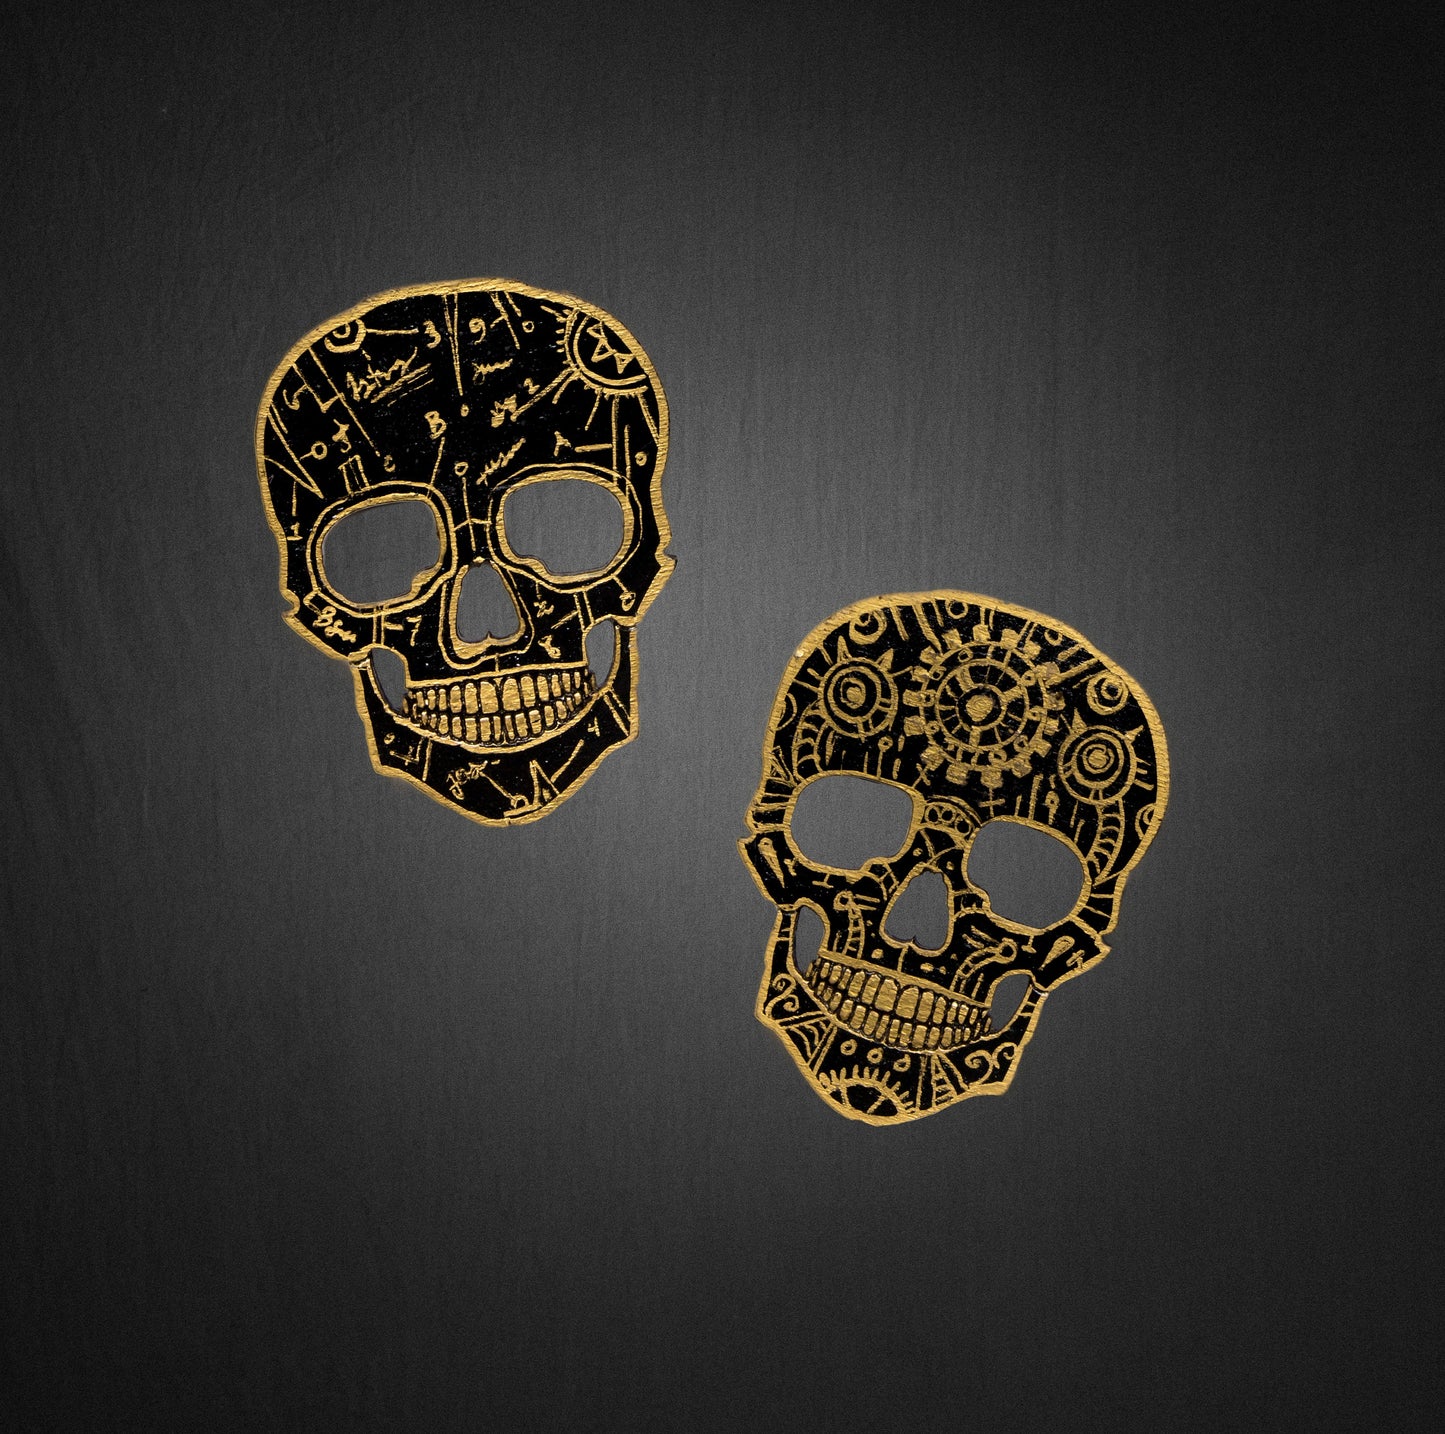 Skull Wood Magnet Set Of Two-Black & Gold-Anatomical Skull-Steampunk Skull-Hand Painted Wood Magnet-Gothic Home Decor-Gifts-Fridge Decor